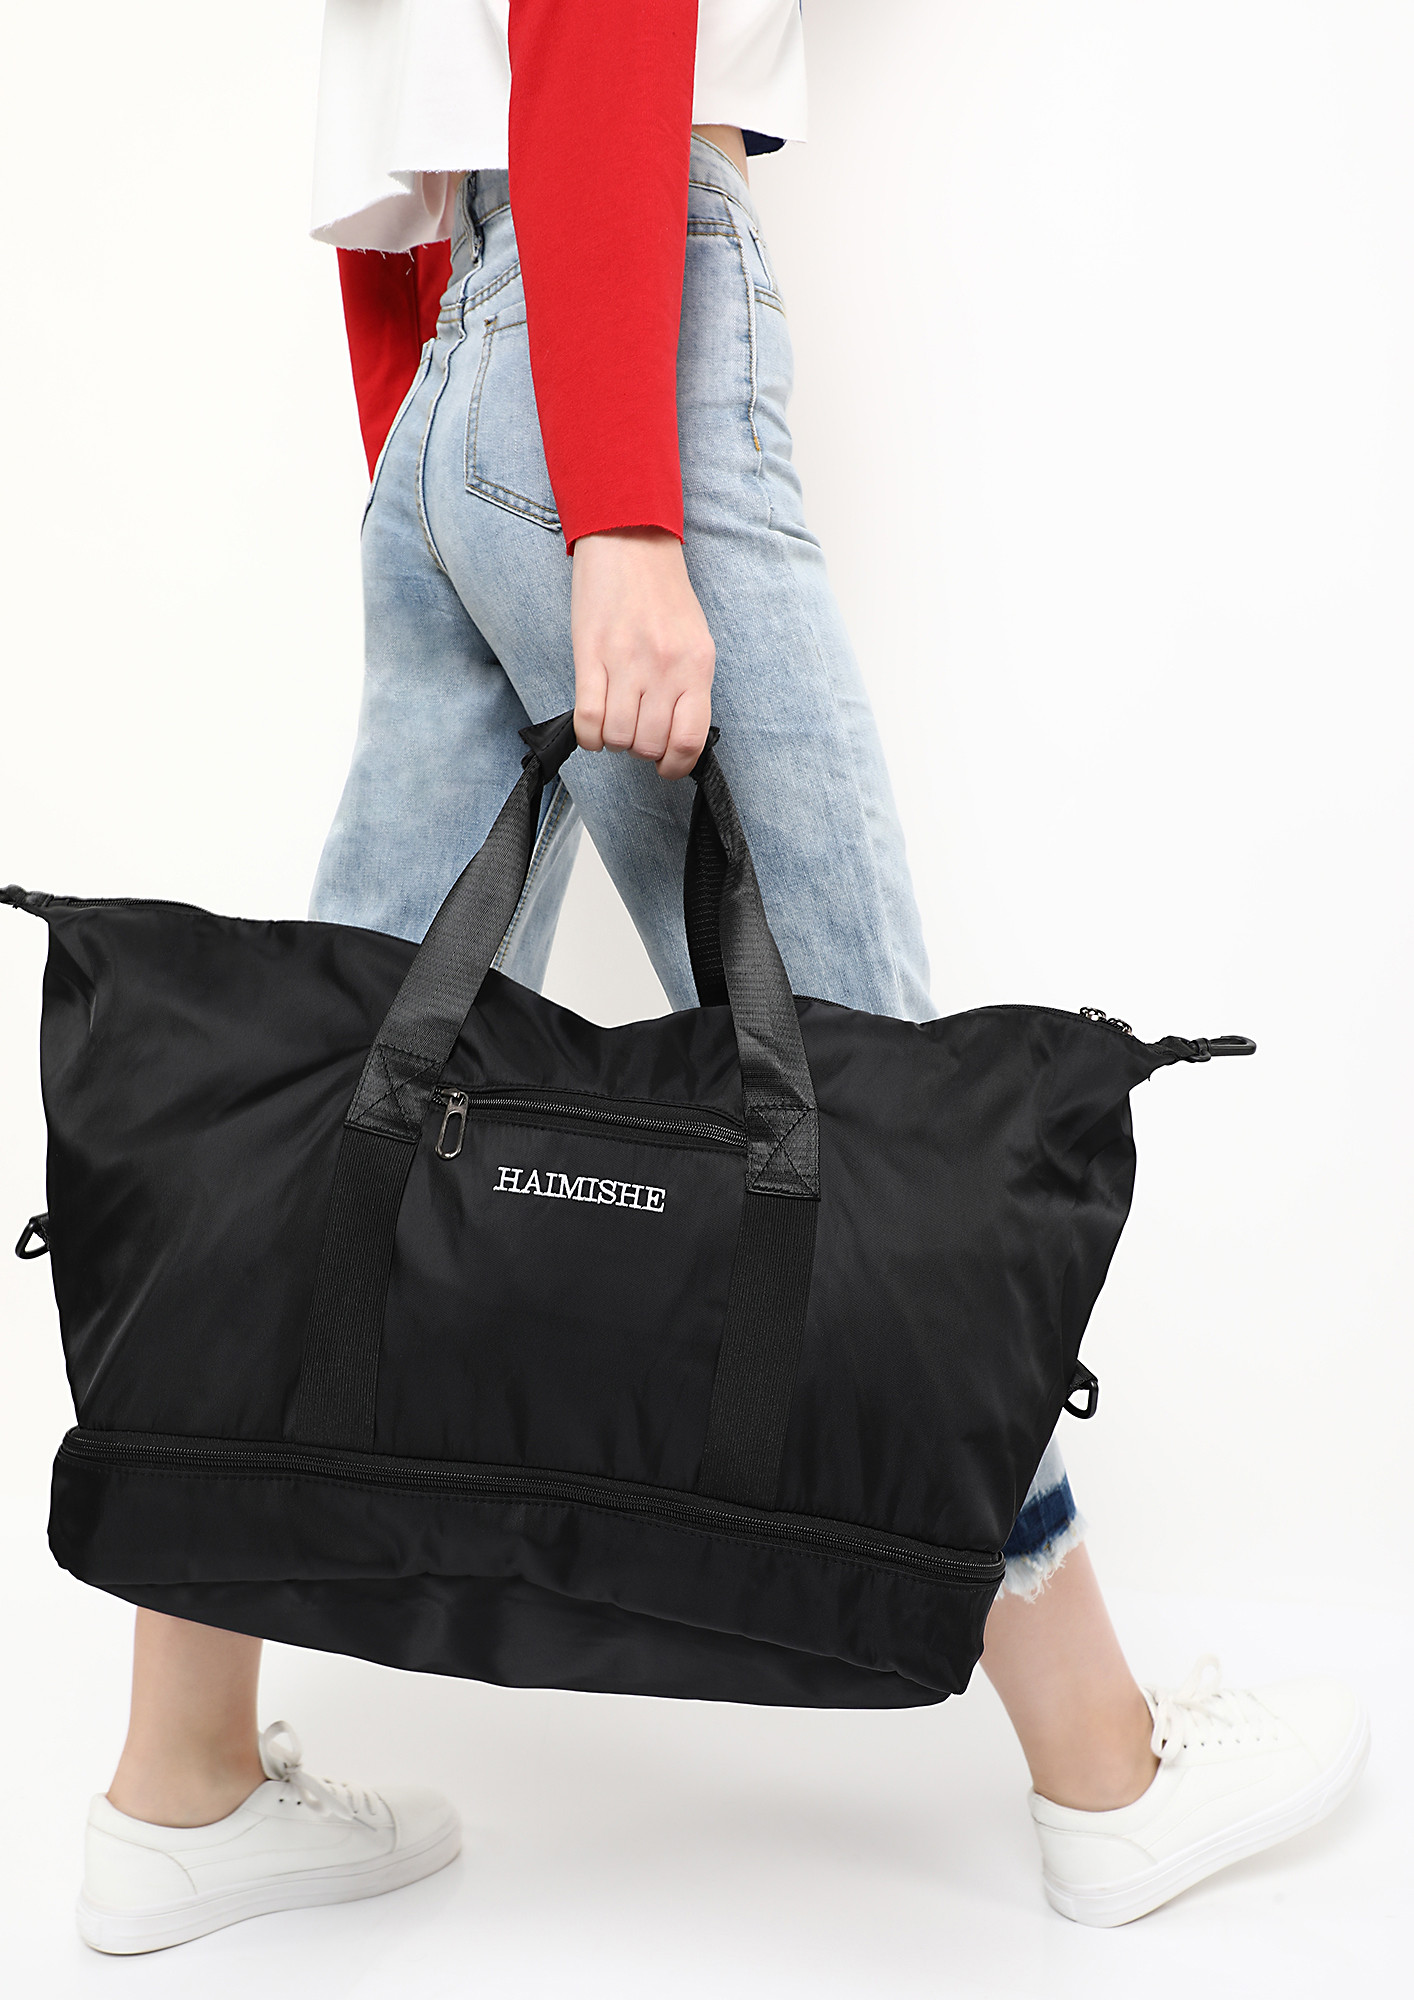 ALL IN FOR THE WEEKEND STYLE BLACK DUFFLE BAG